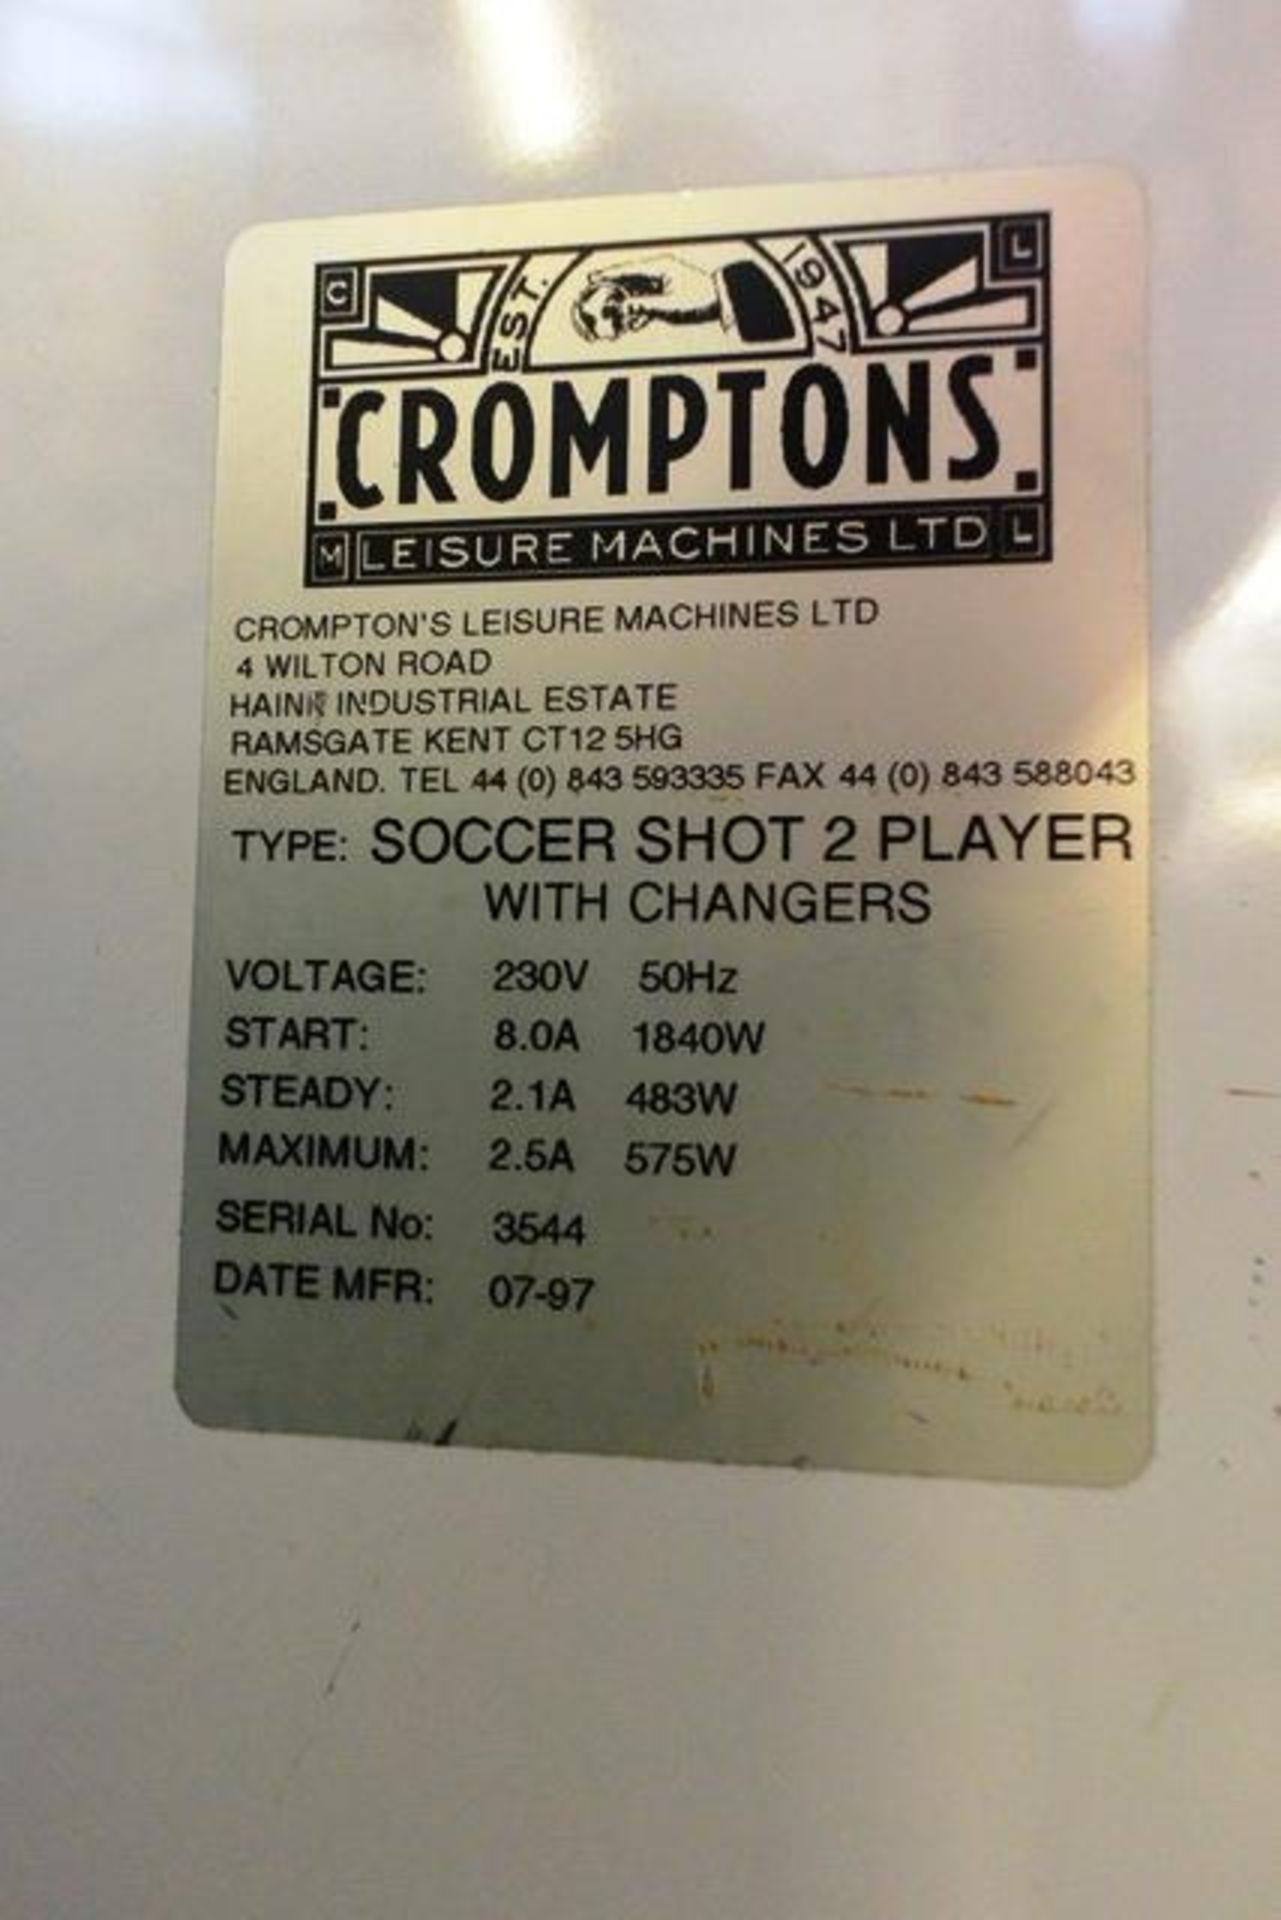 Cromptons Leisure Machines Ltd "Soccer Shot 2 Player with Changers" (1997), pay to play, serial - Image 4 of 4